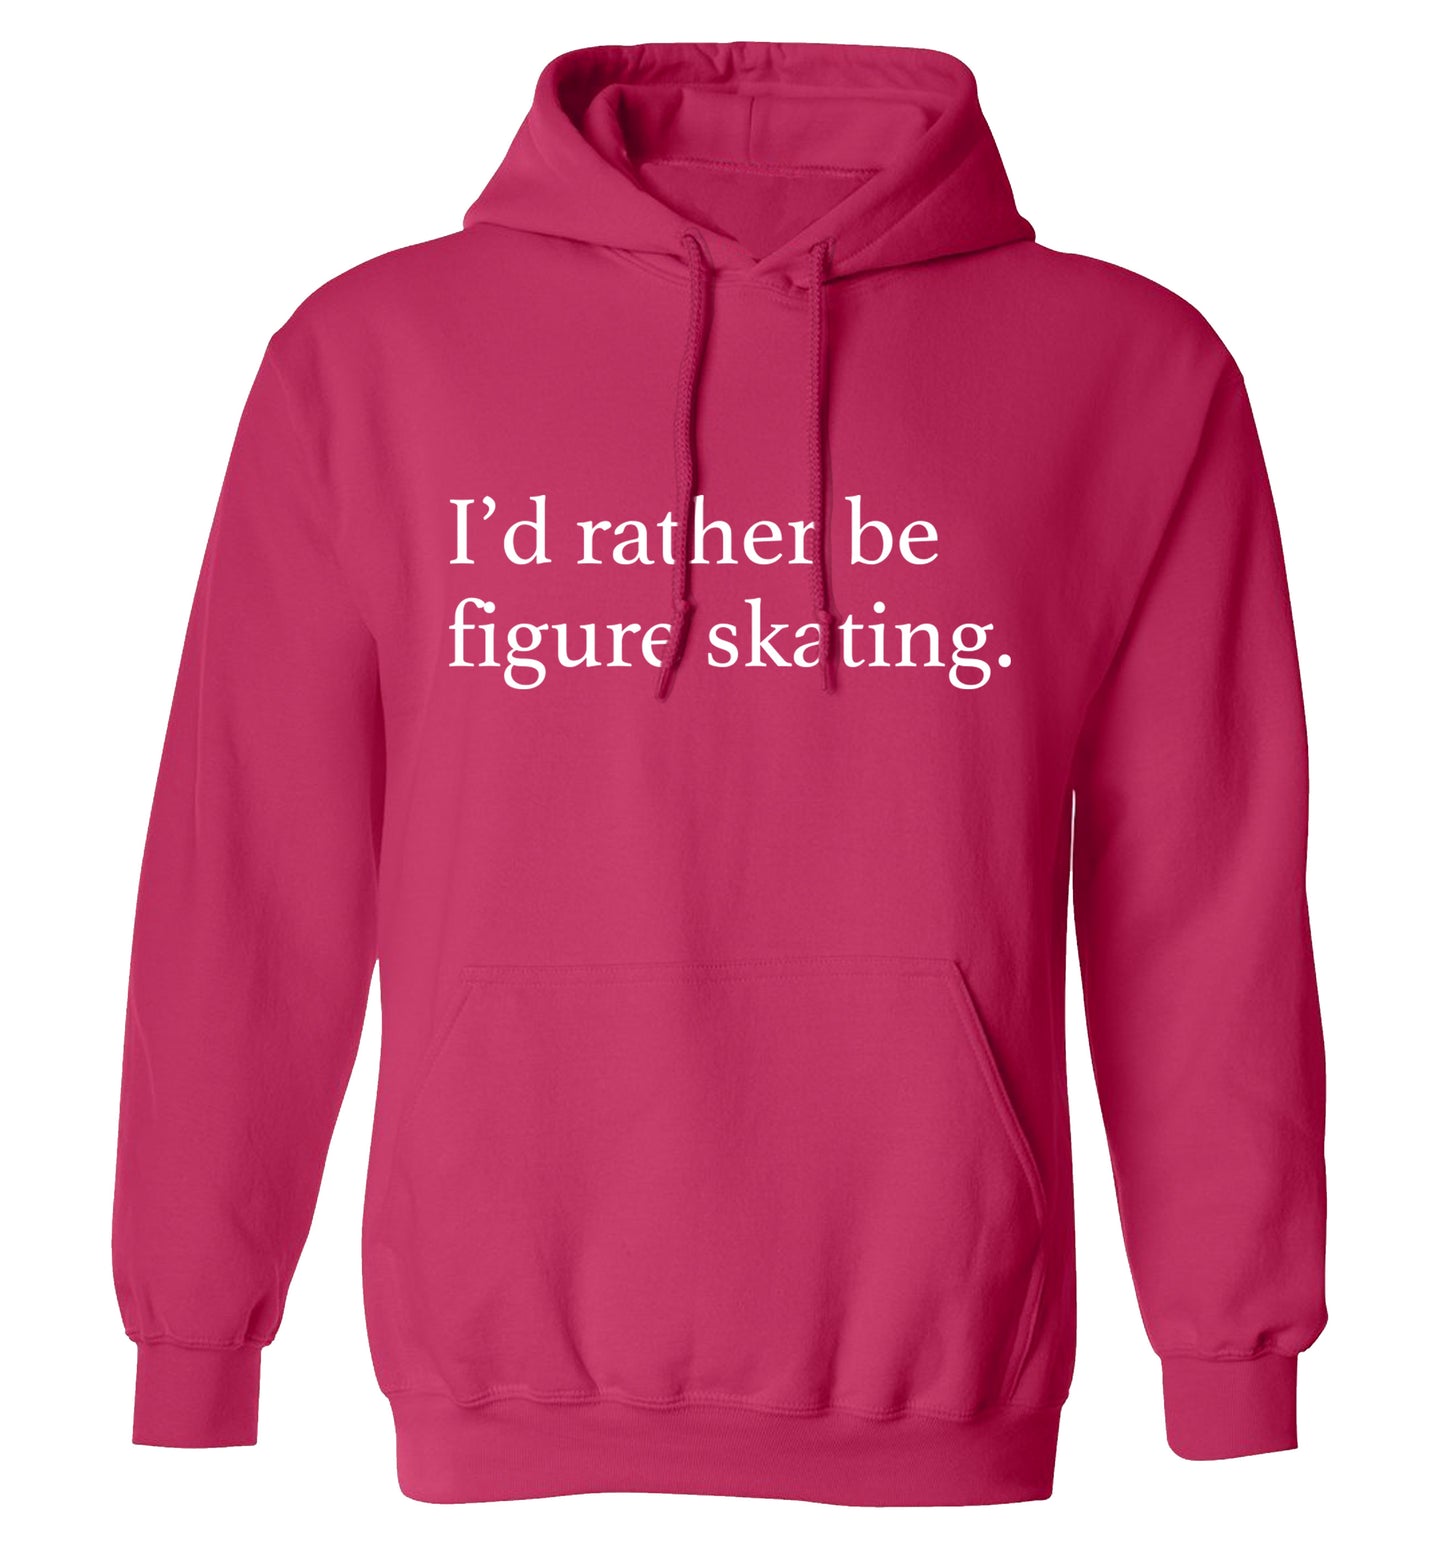 I'd rather be figure skating adults unisexpink hoodie 2XL